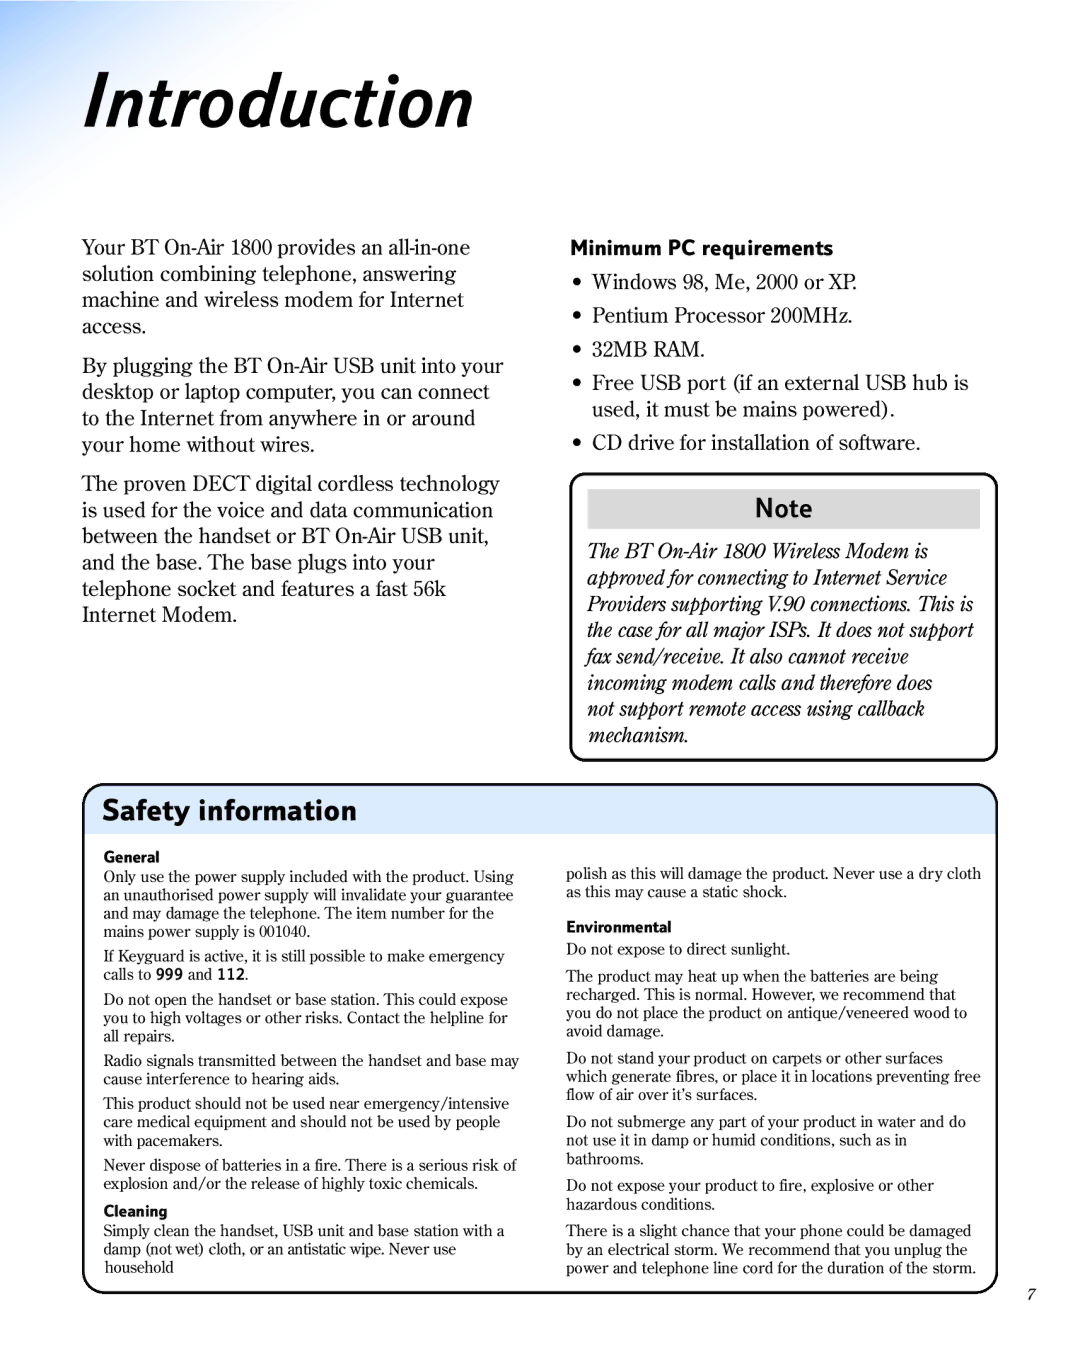 BT 1800 manual Introduction, Safety information, Minimum PC requirements 